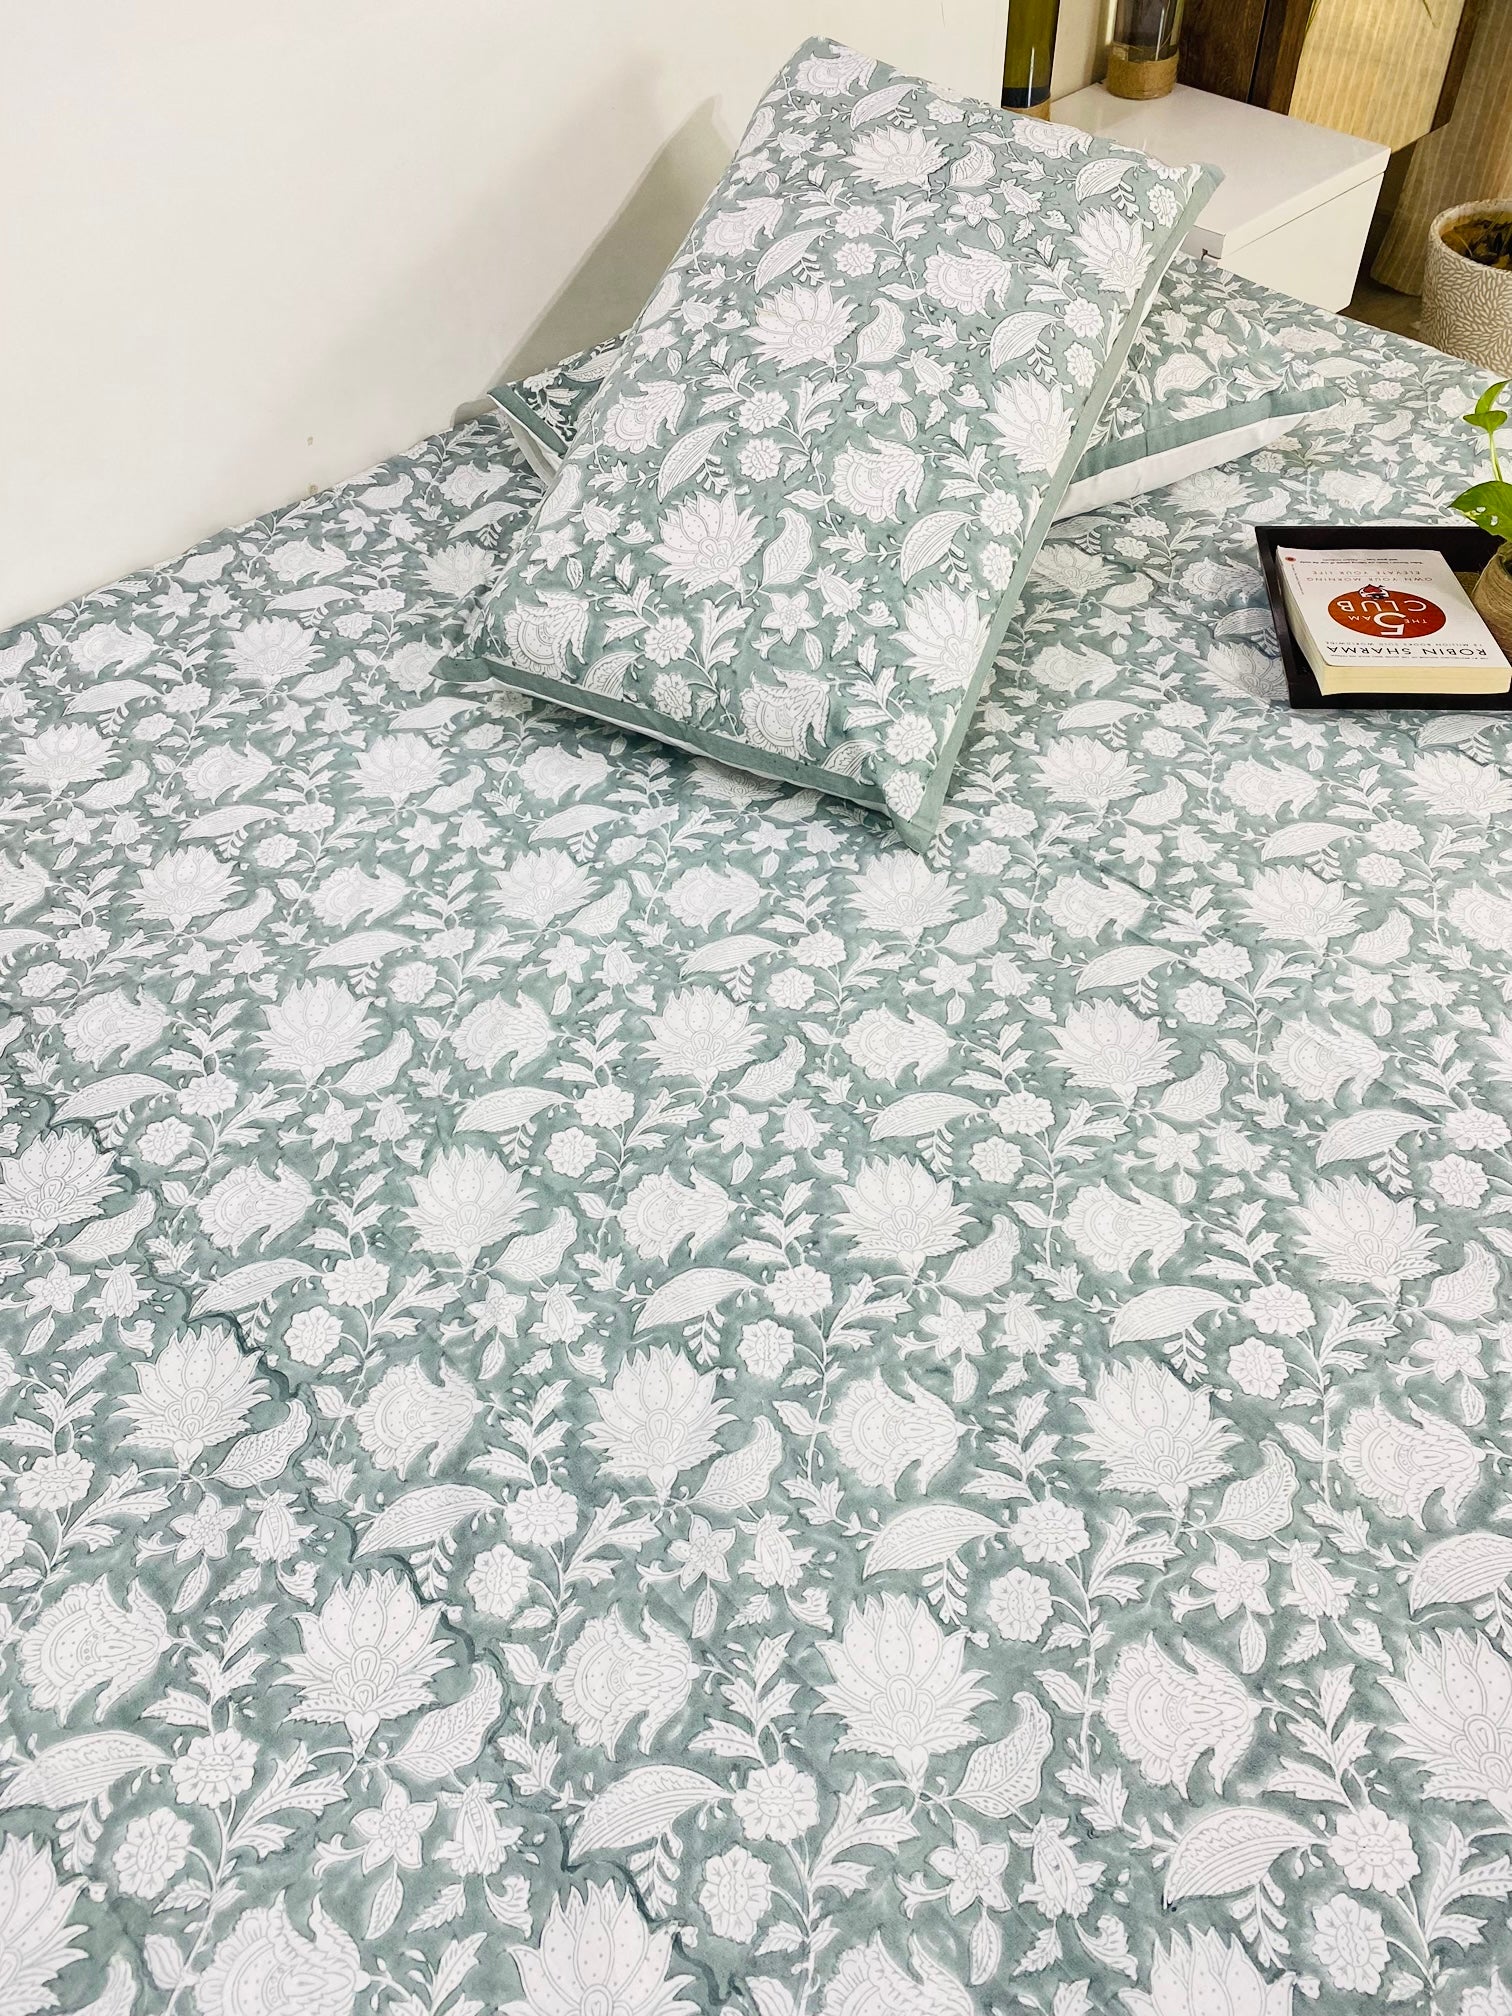 Hand Blockprinted Cotton Bedsheet -King Size (108*108 inches)